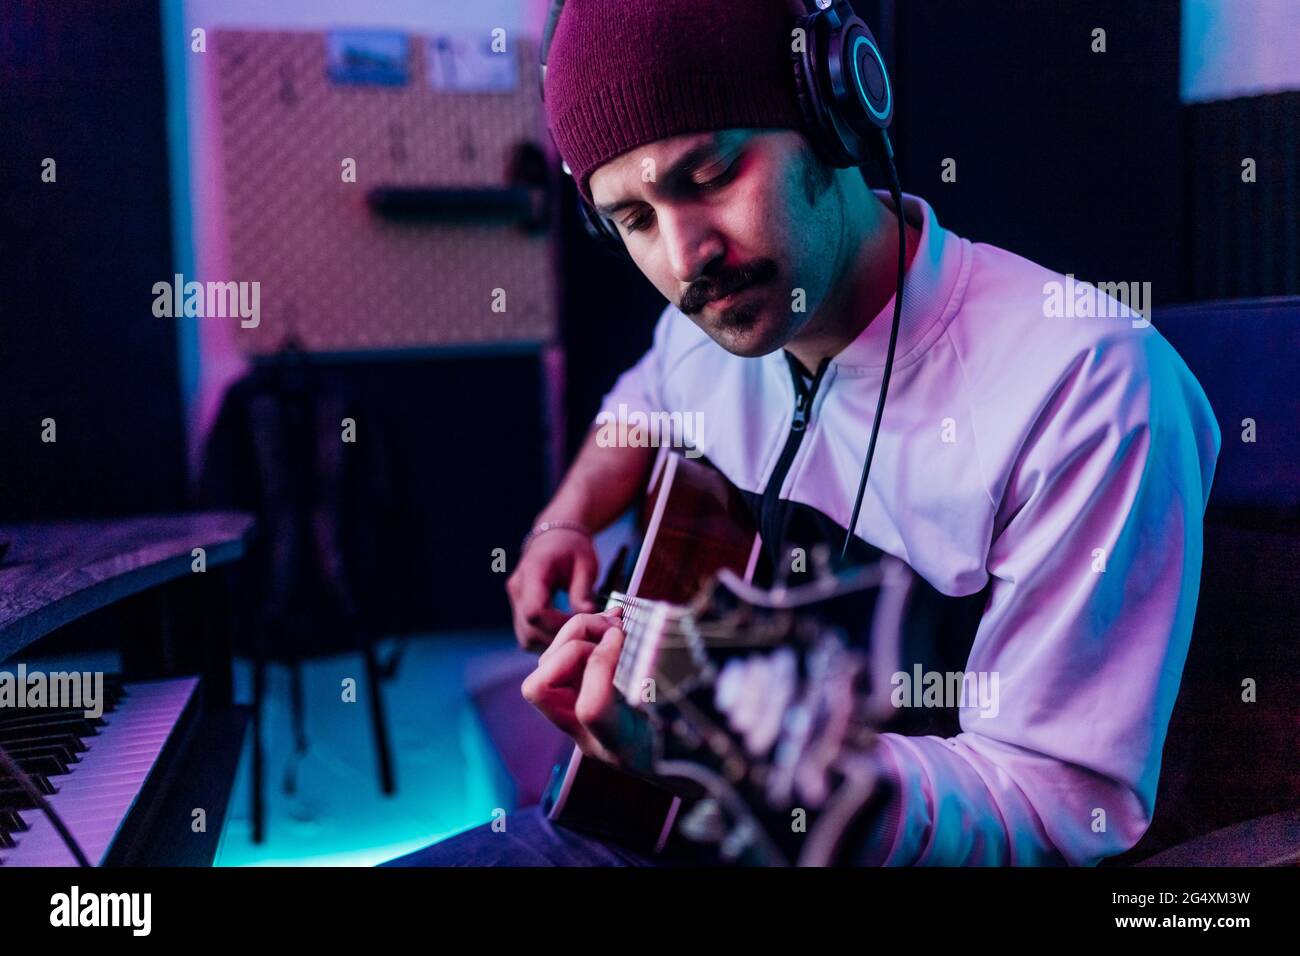 Male guitarist wearing knit hat playing guitar at home studio Stock Photo